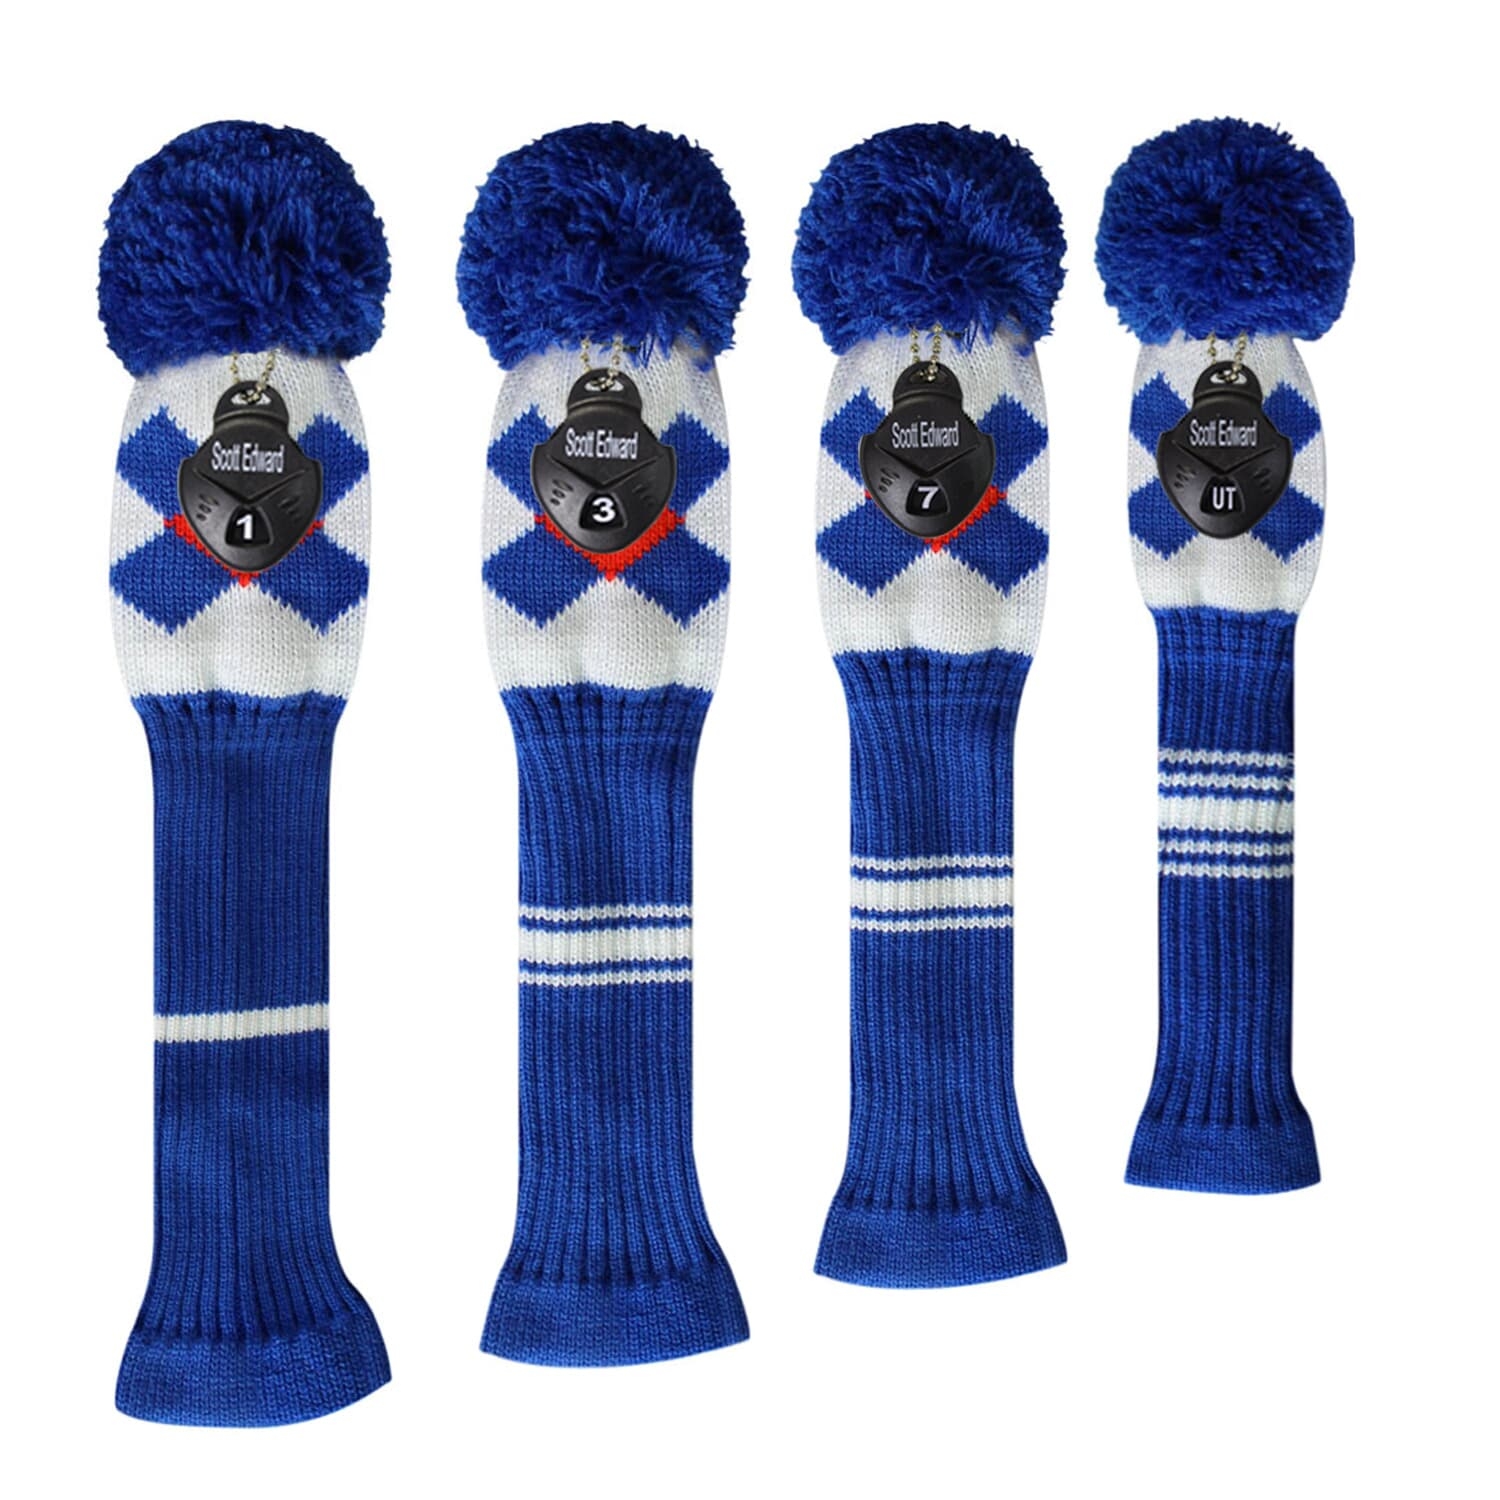 Scott Edward Knit Golf Headcovers, Set of 4 for Driver Wood*1, Fairway